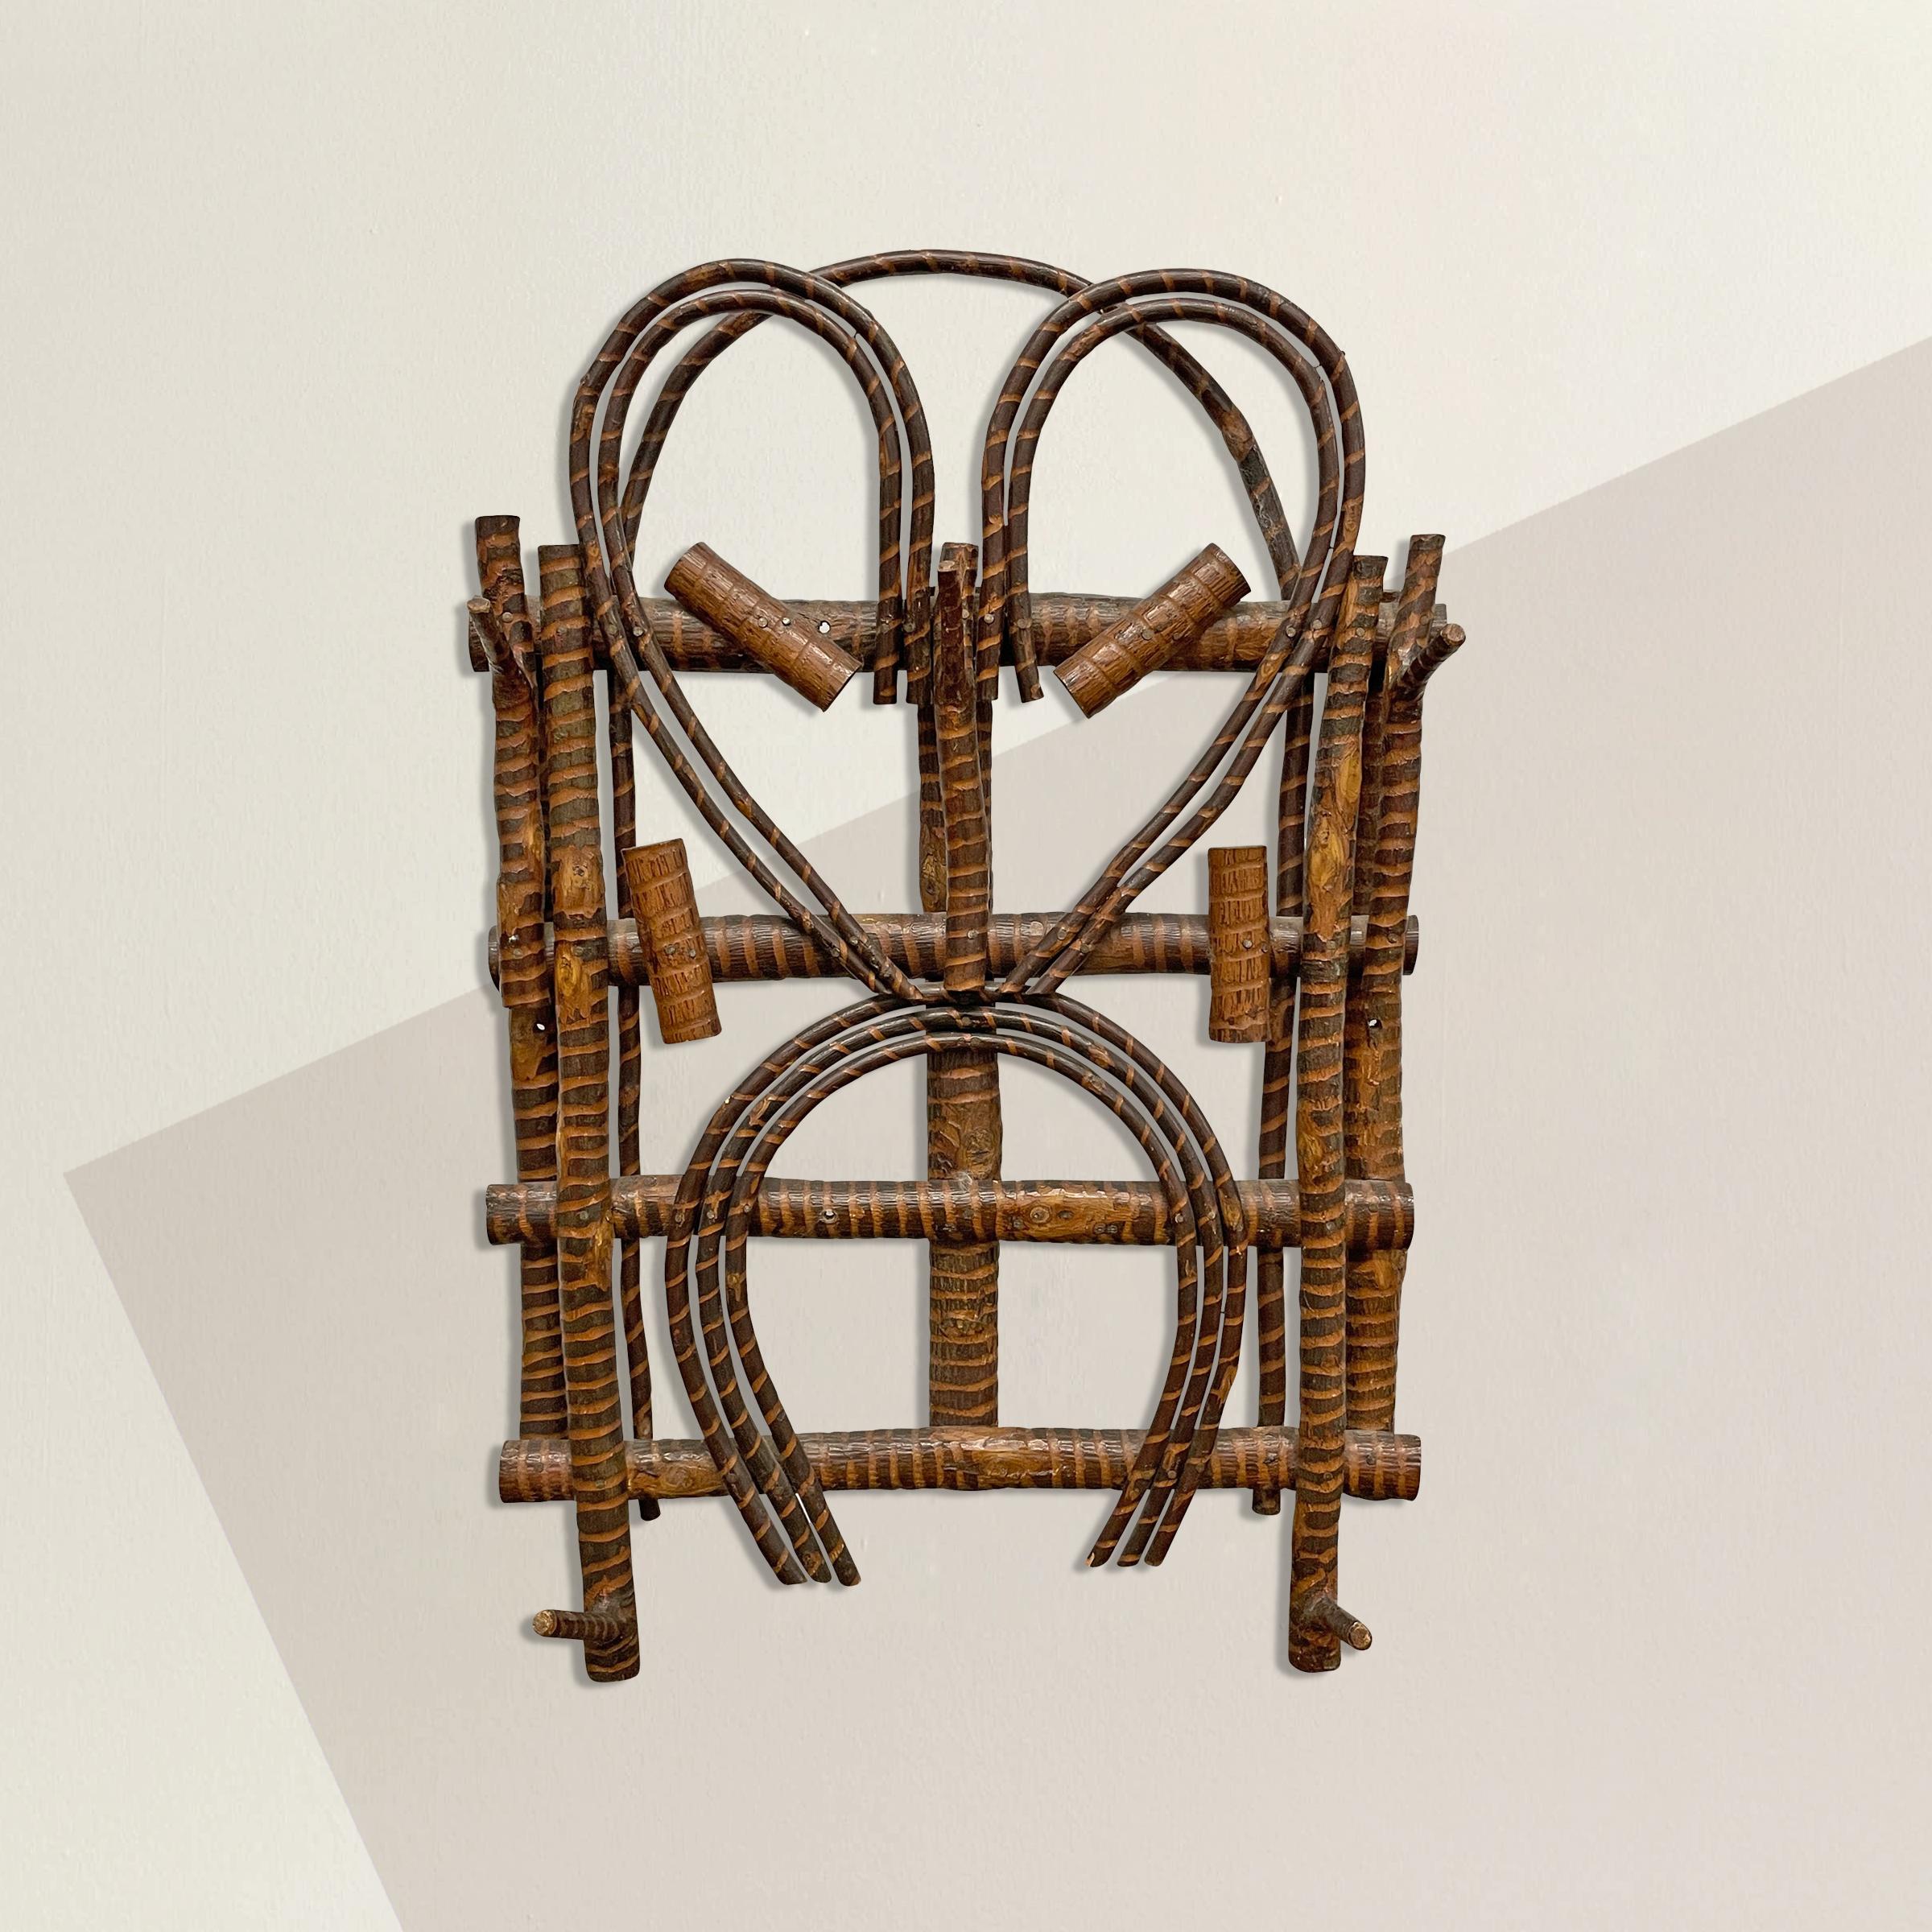 A quaint early 20th century American Adirondack bent and carved willow branch coat and hat rack with a heart and horseshoe motif, two hooks on each side, and one hook in the center at the top.